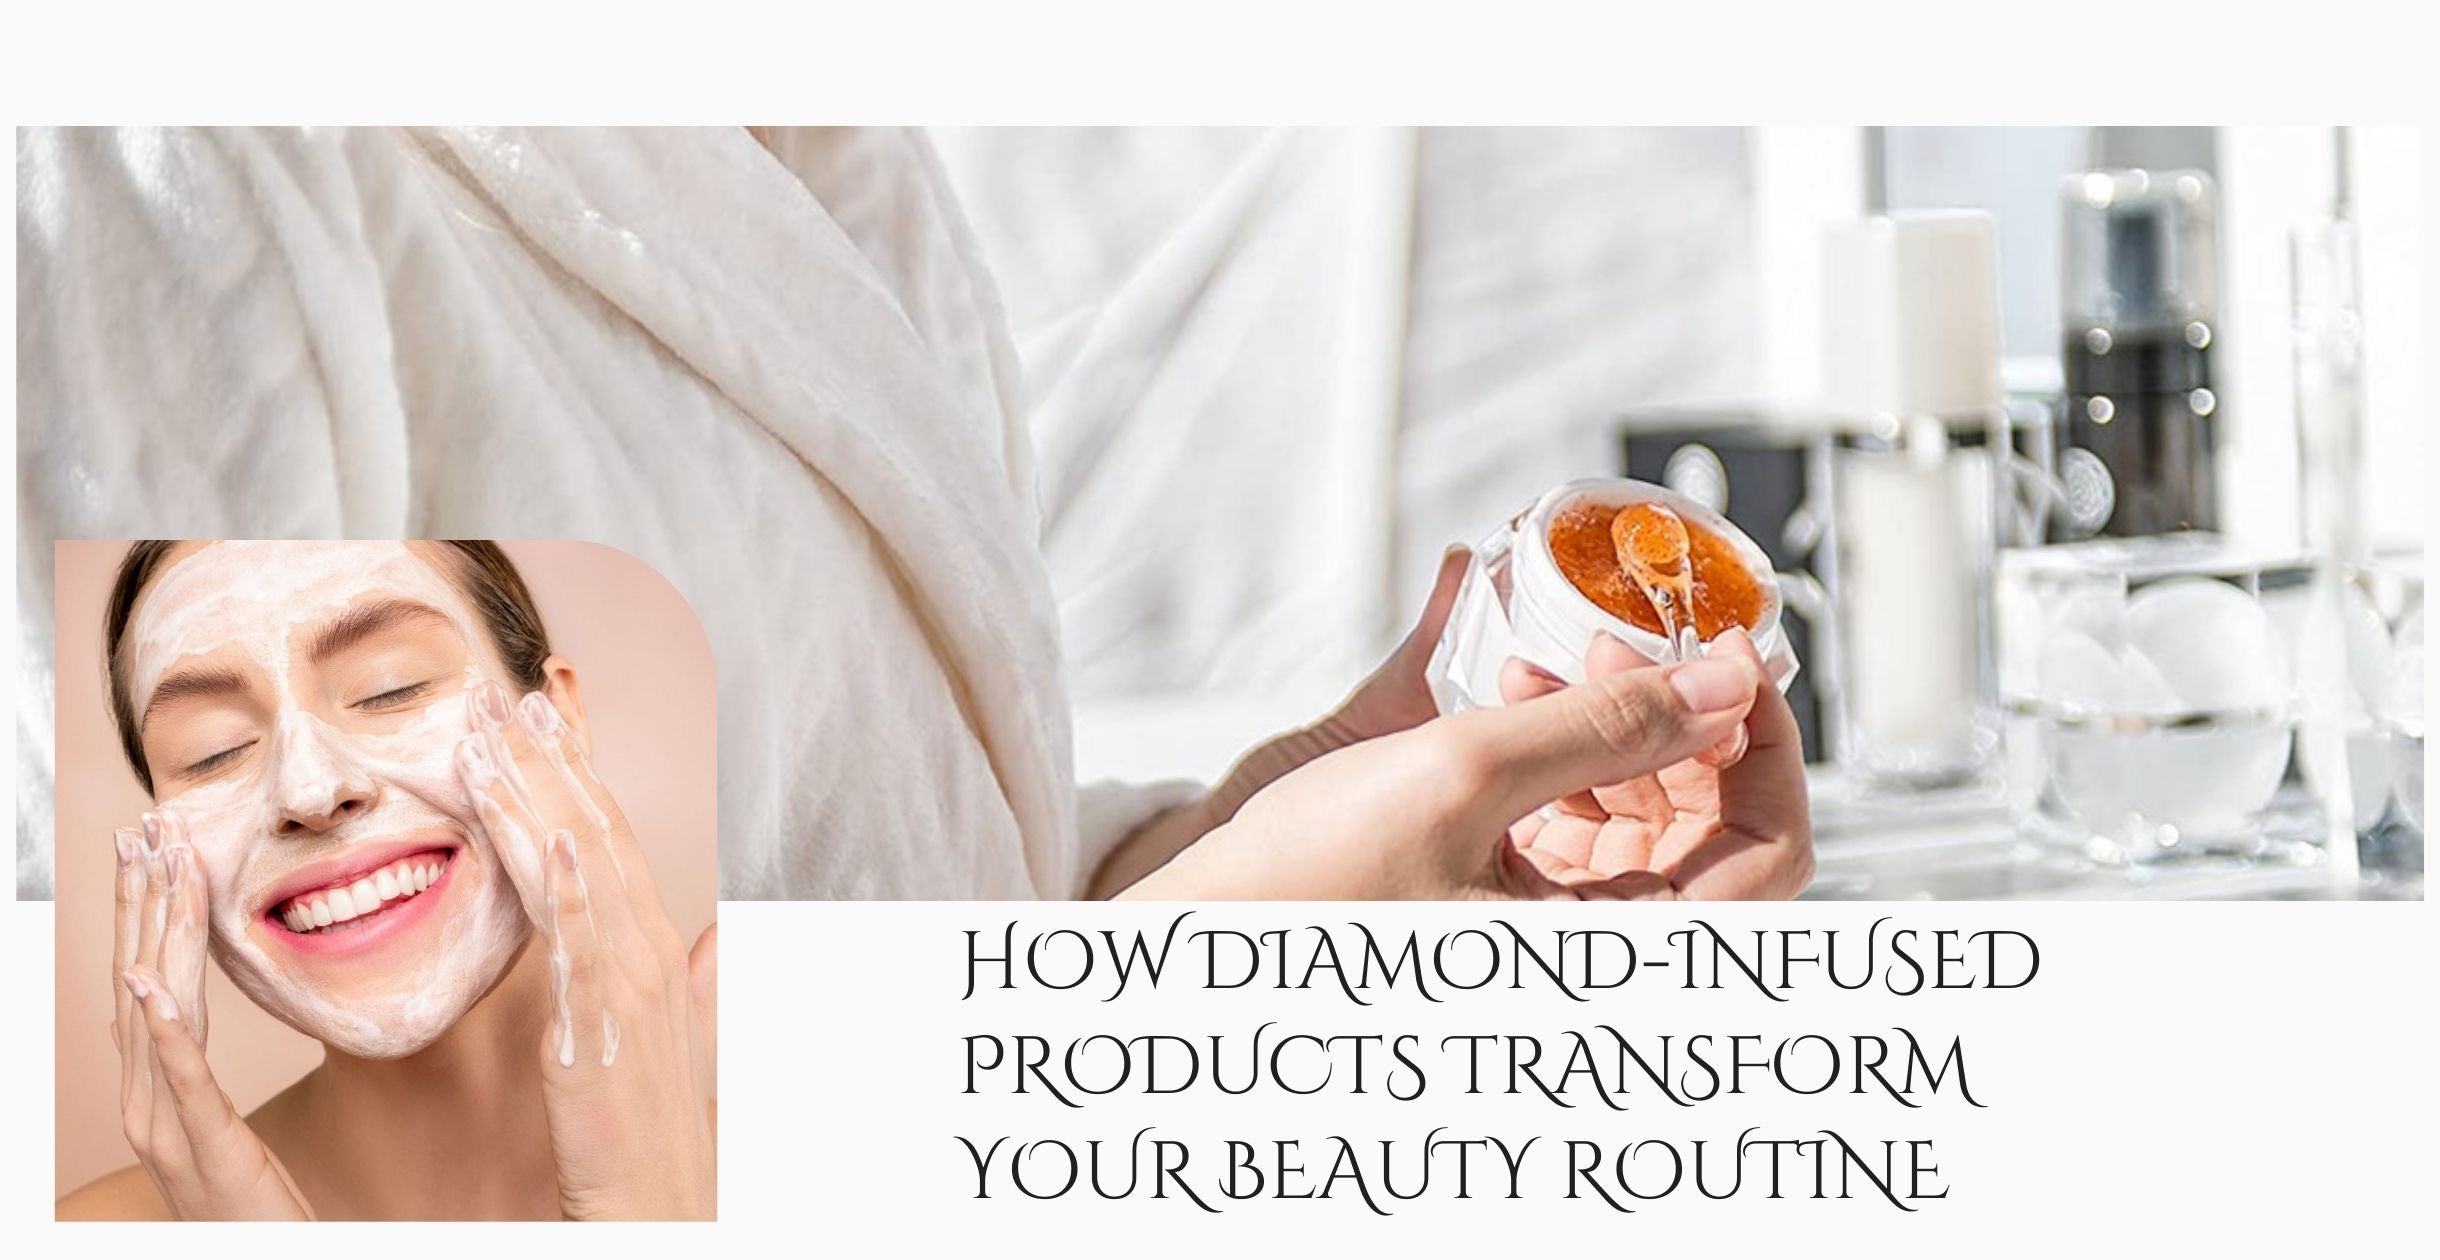 How Diamond-Infused Products Transform Your Beauty Routine